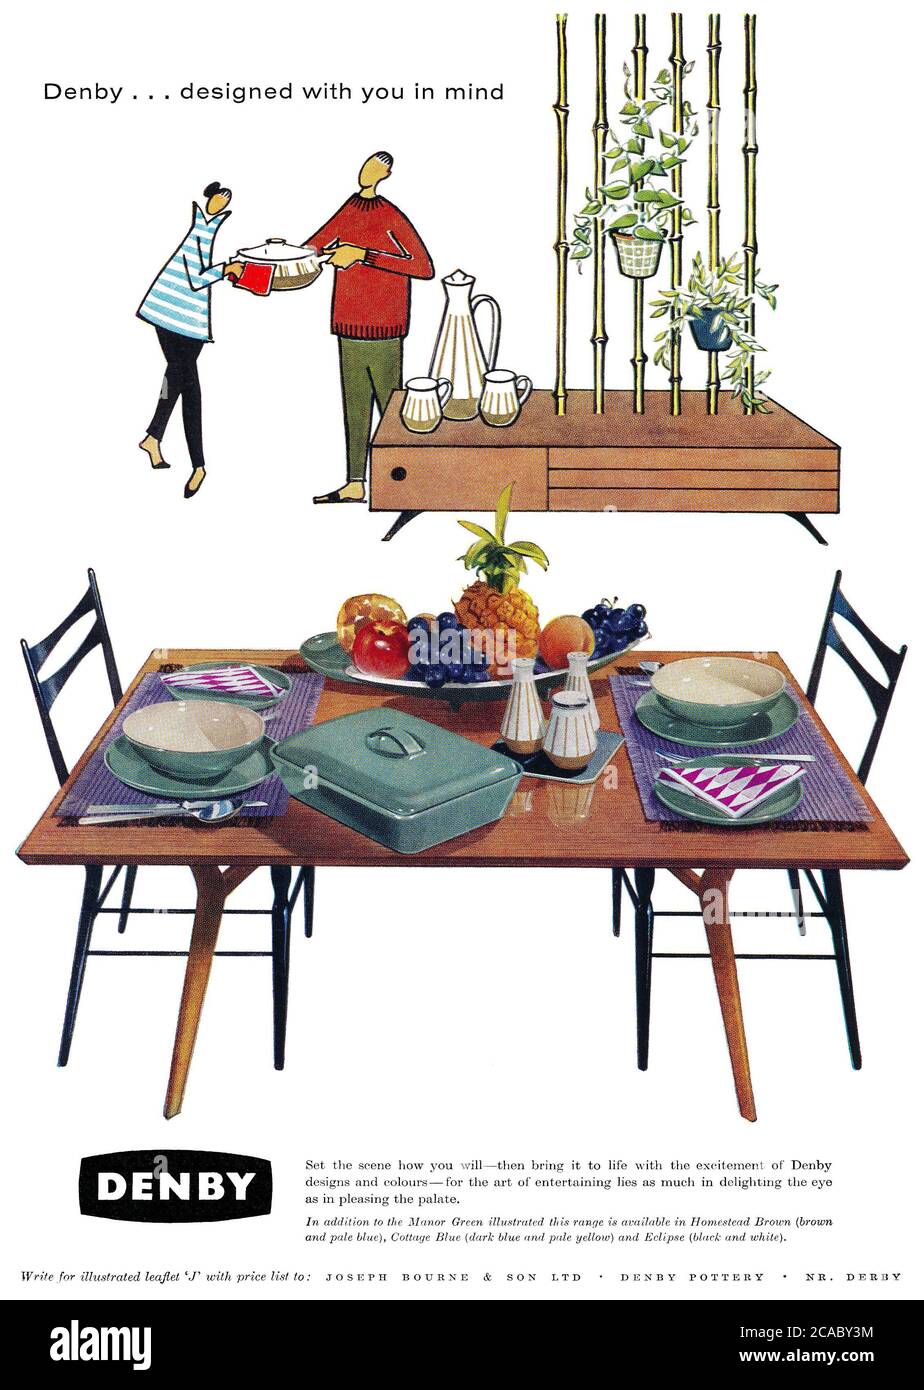 1961 British advertisement for Denby Pottery by Joseph Bourne & Son. Stock Photo